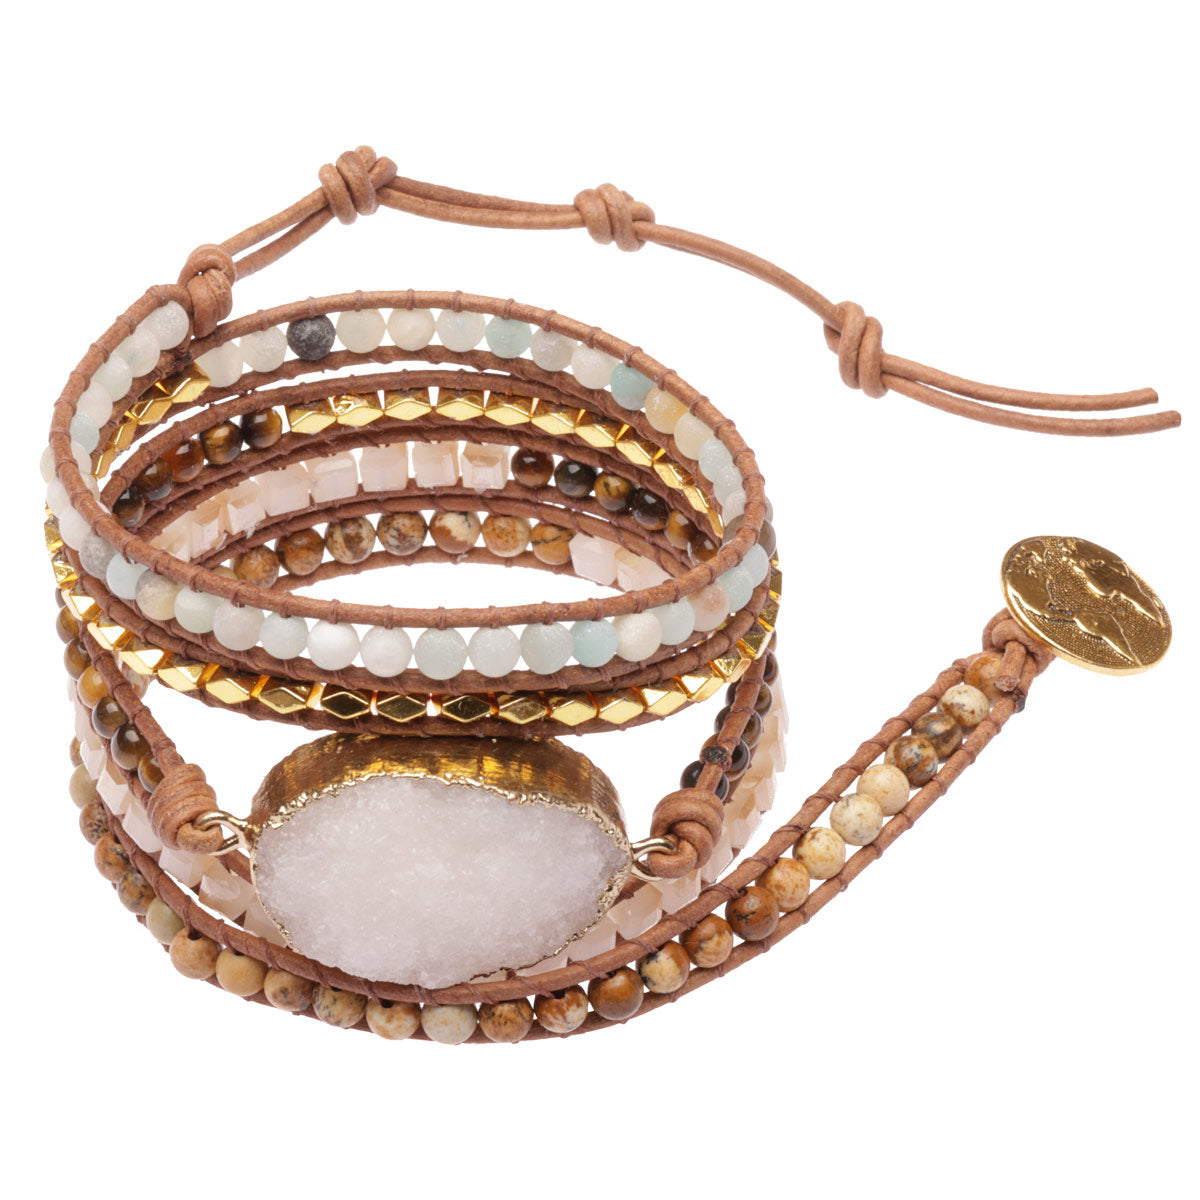 Our Travelers Bracelet with white agate natural stone wraps five times around the wrist. 